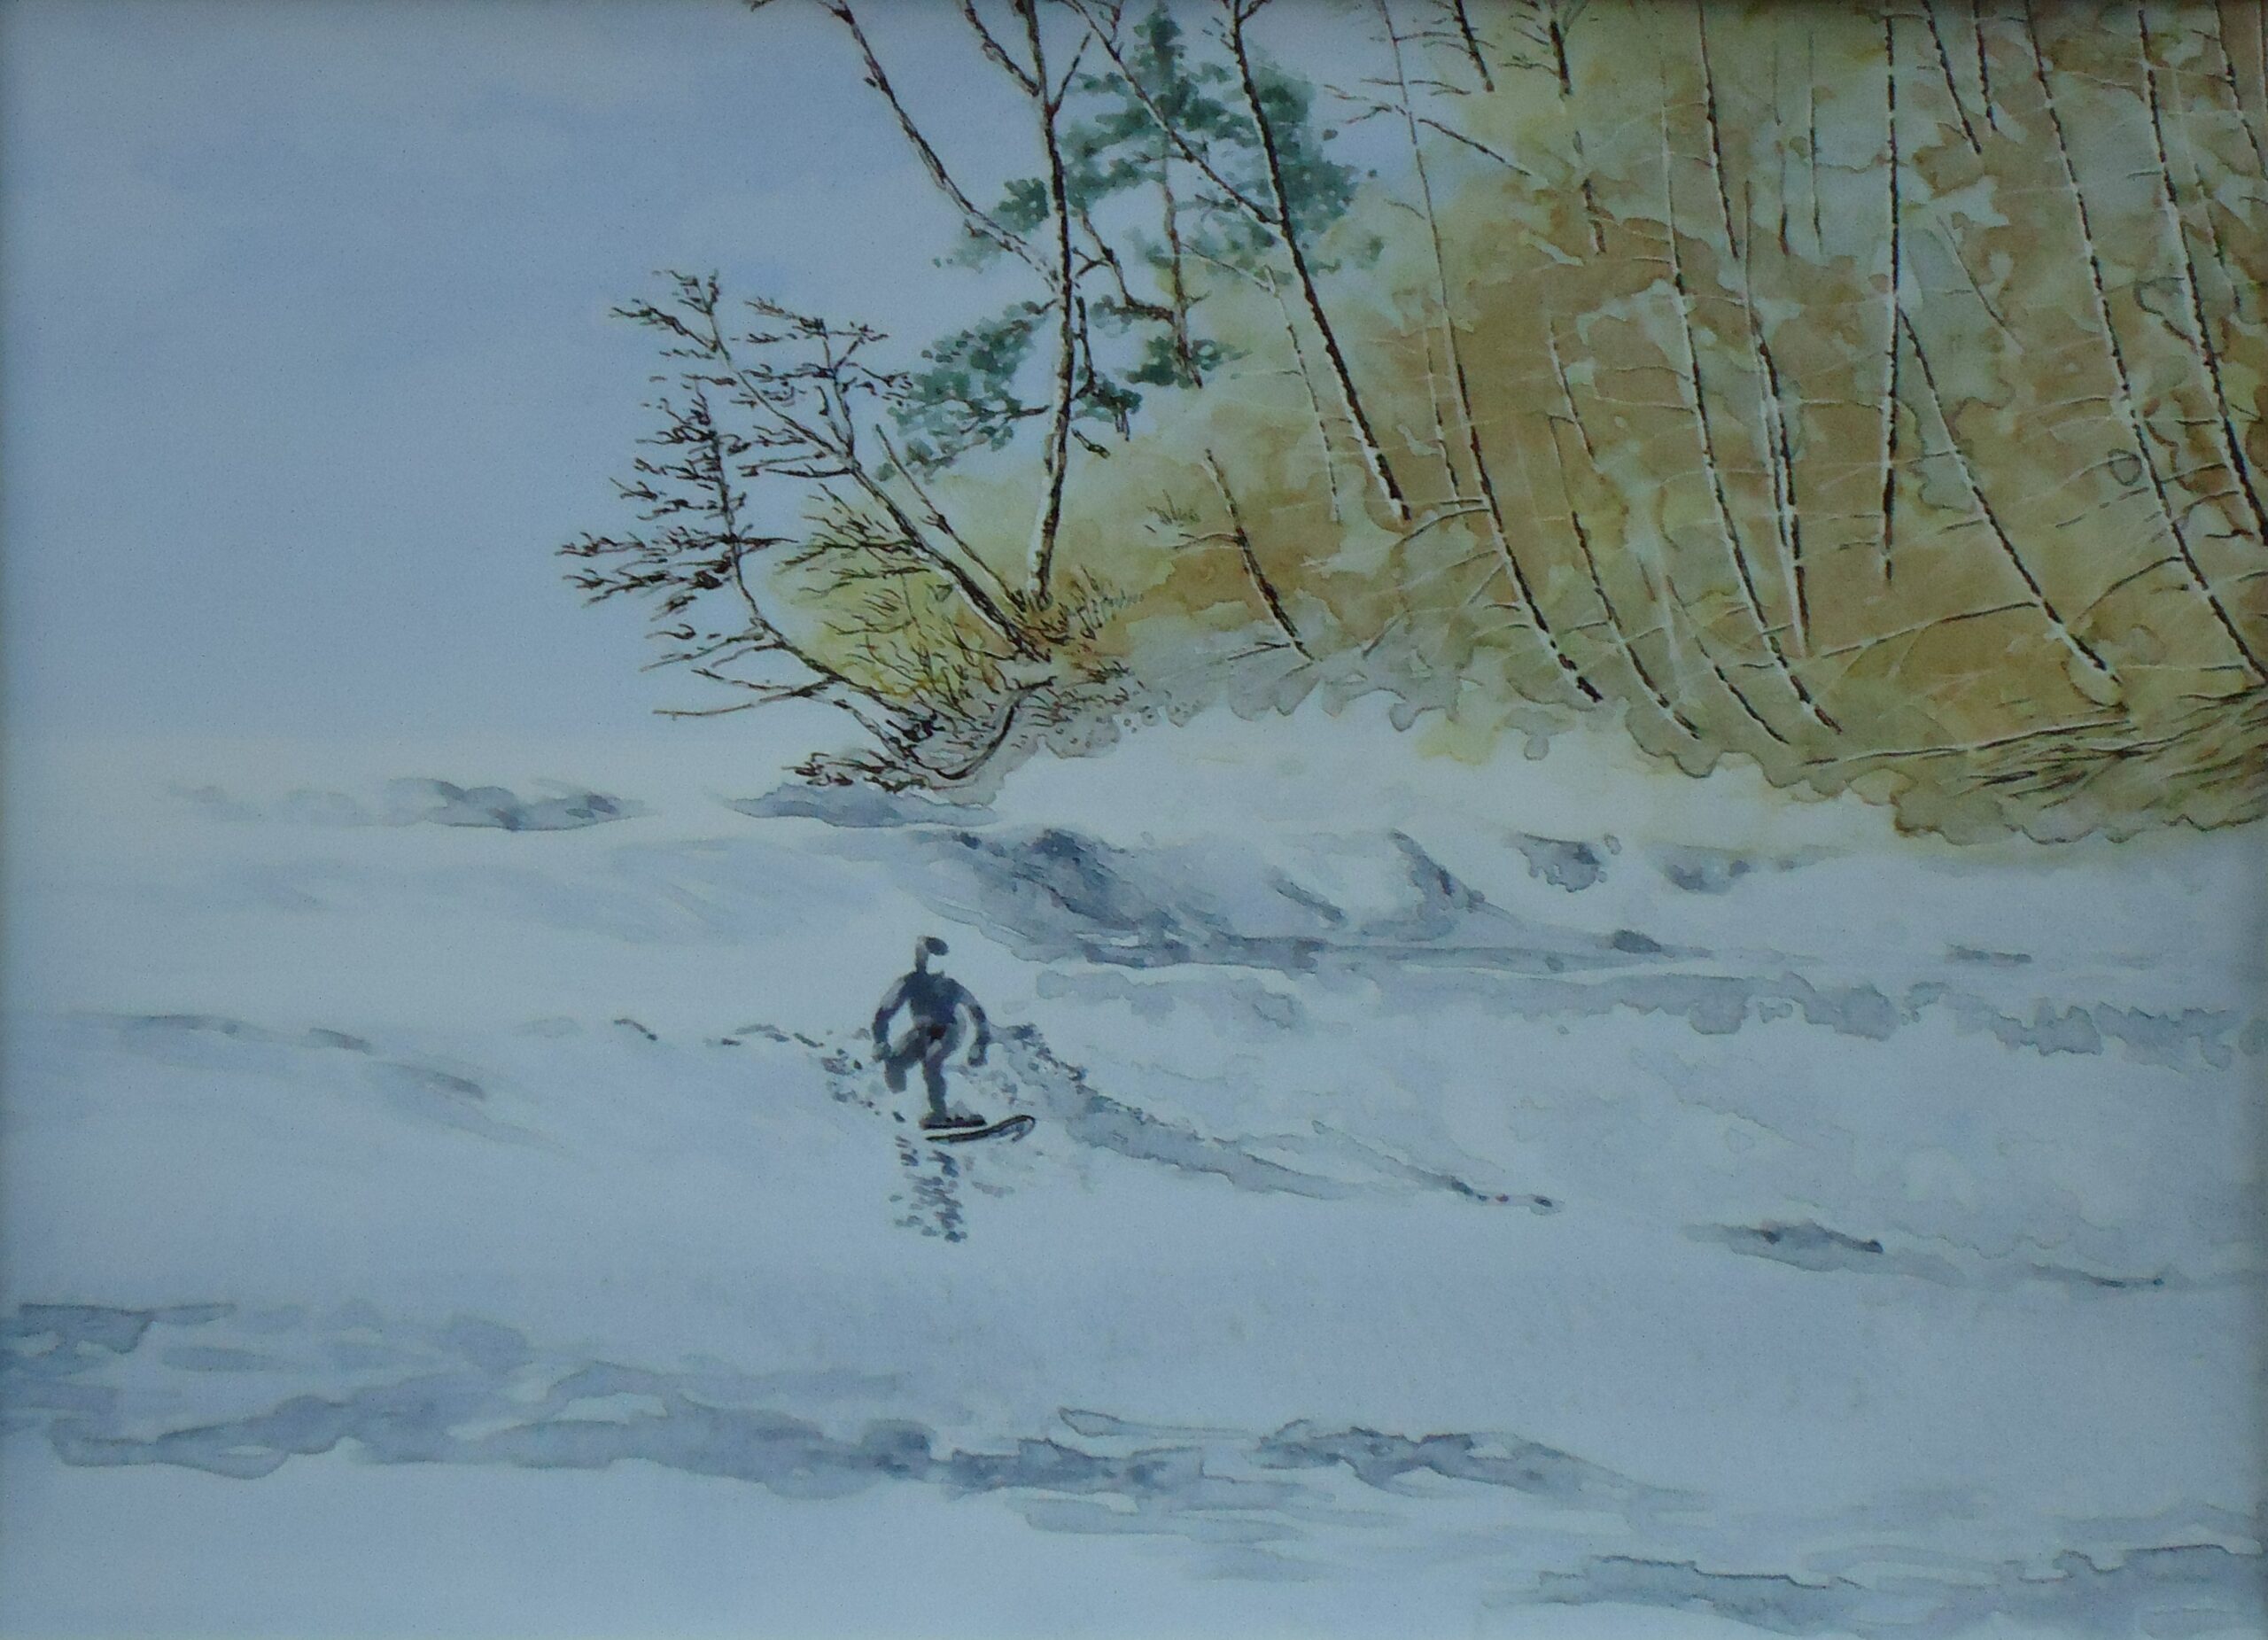 A sketch of a surfer near Jordan River by Keith Cains.